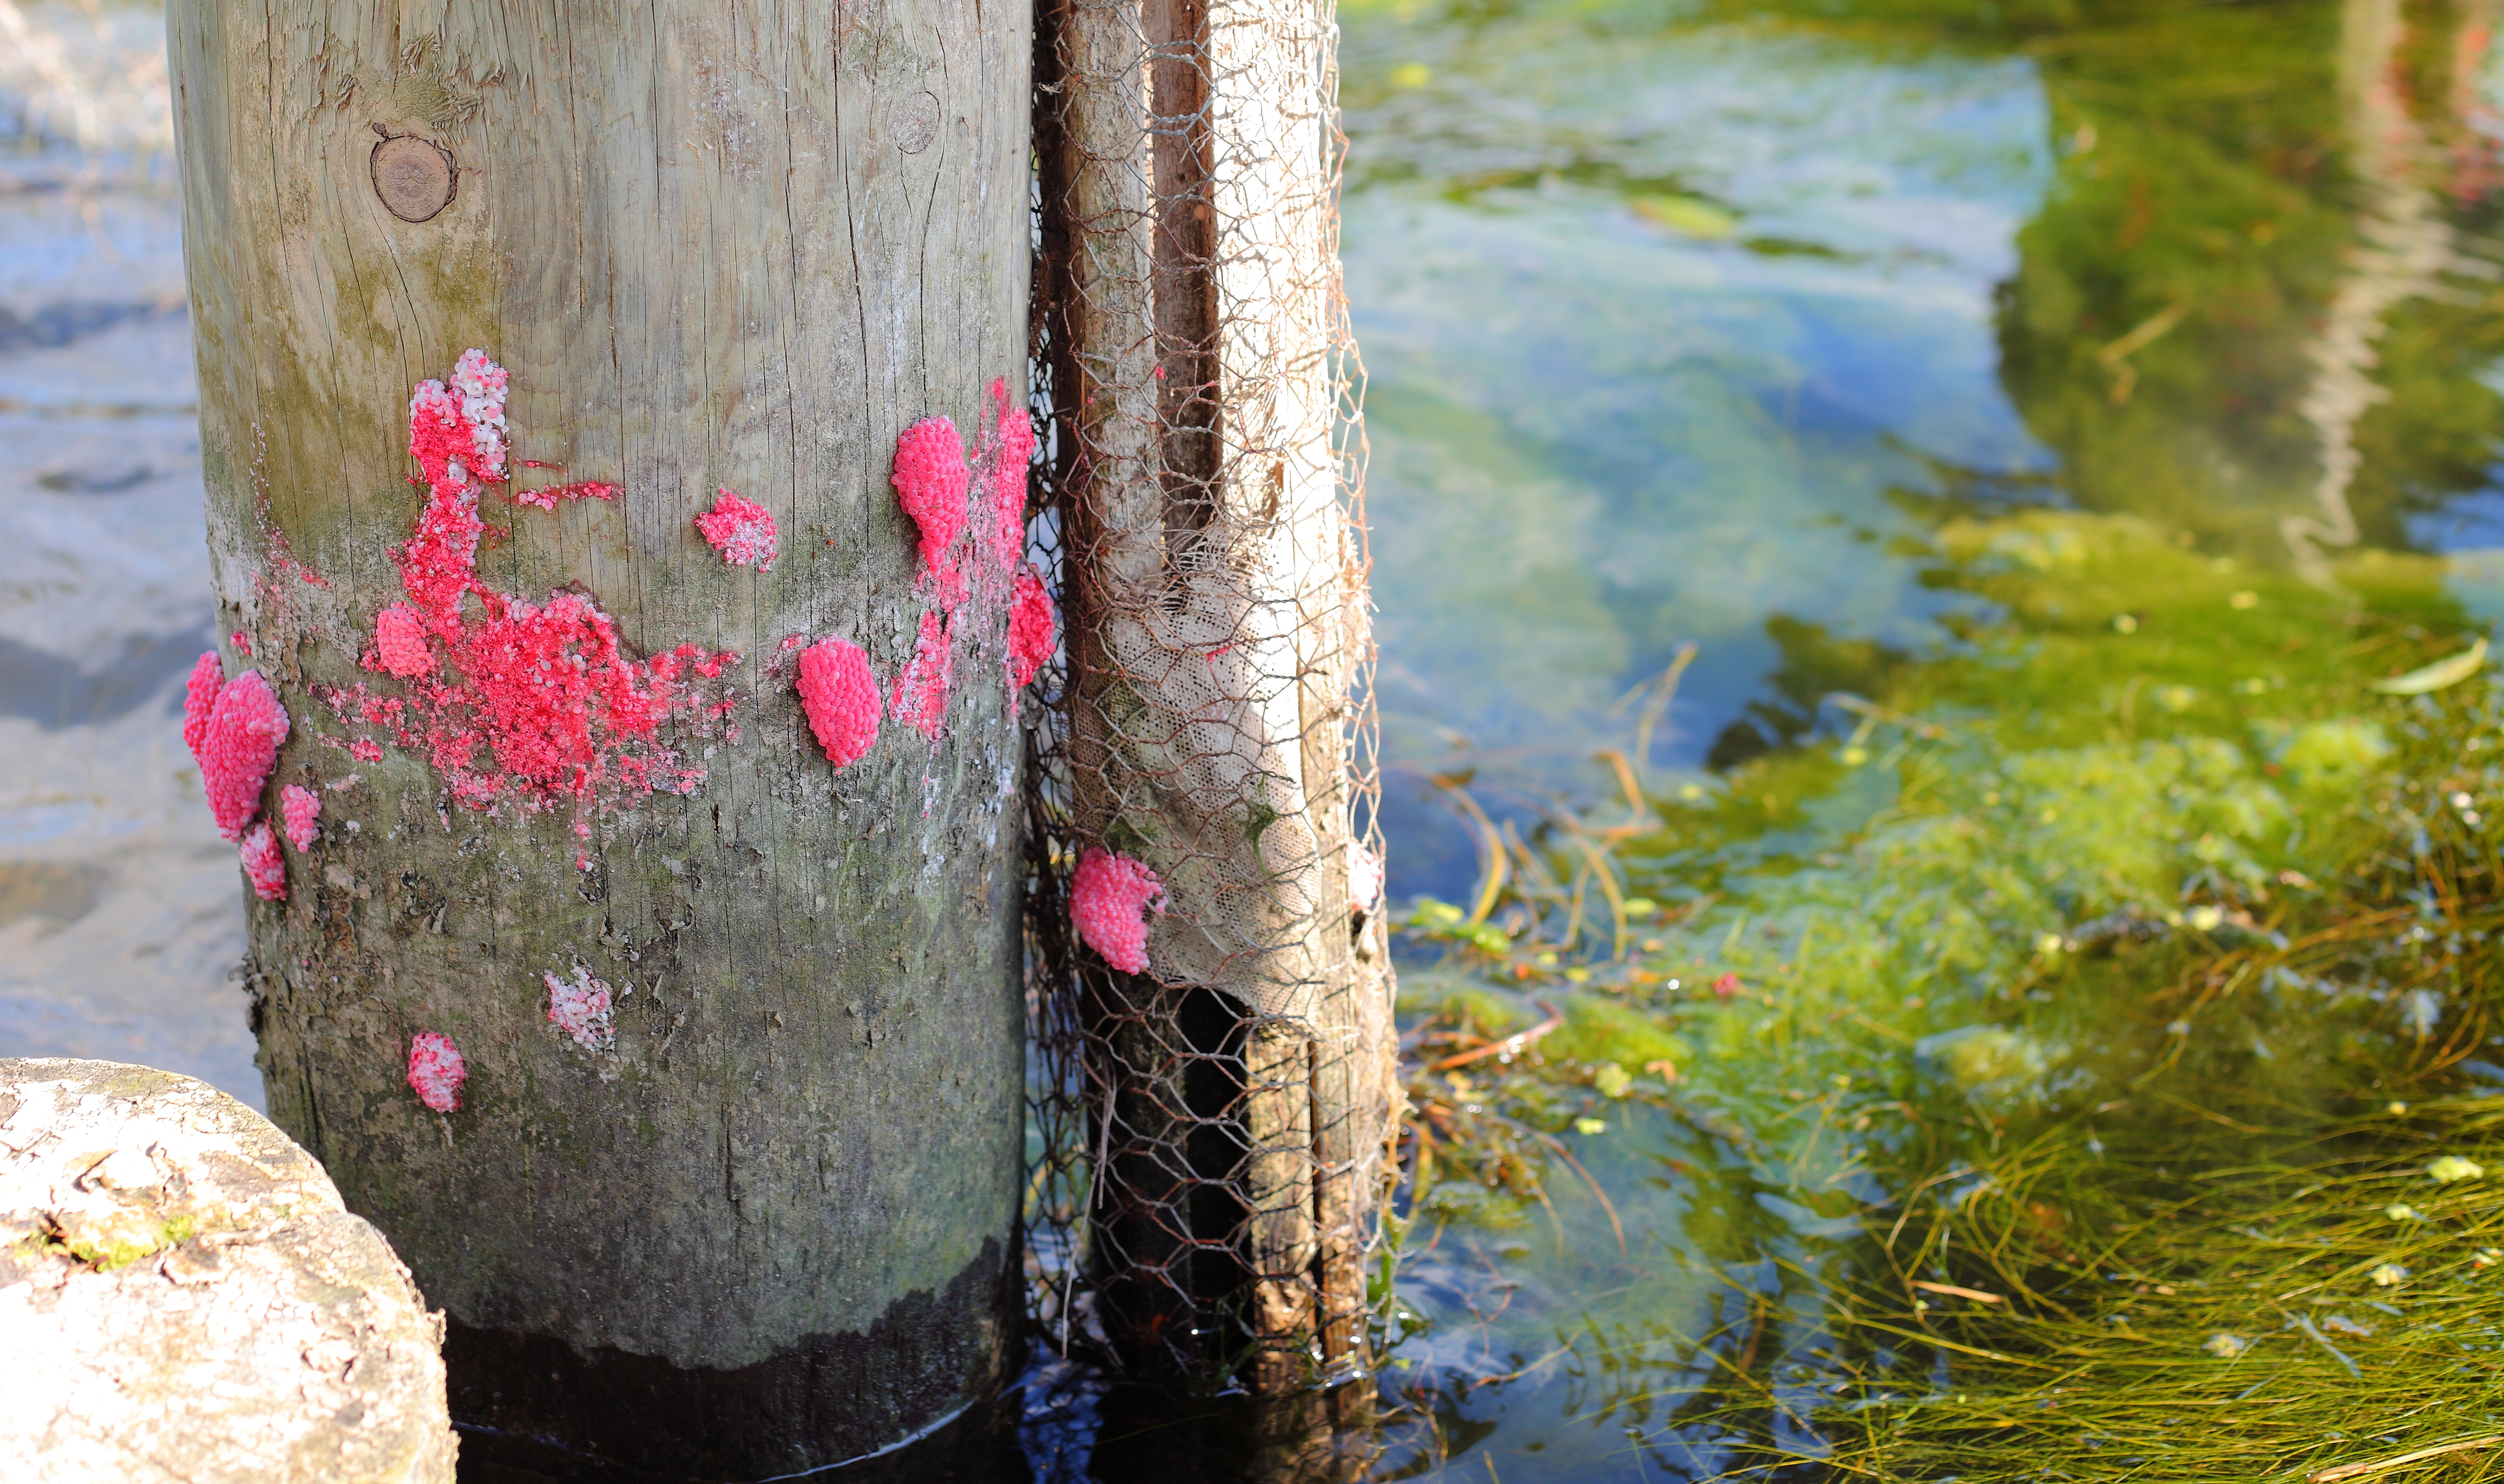 Bright pink apple snail eggs on a wooden post in standing water